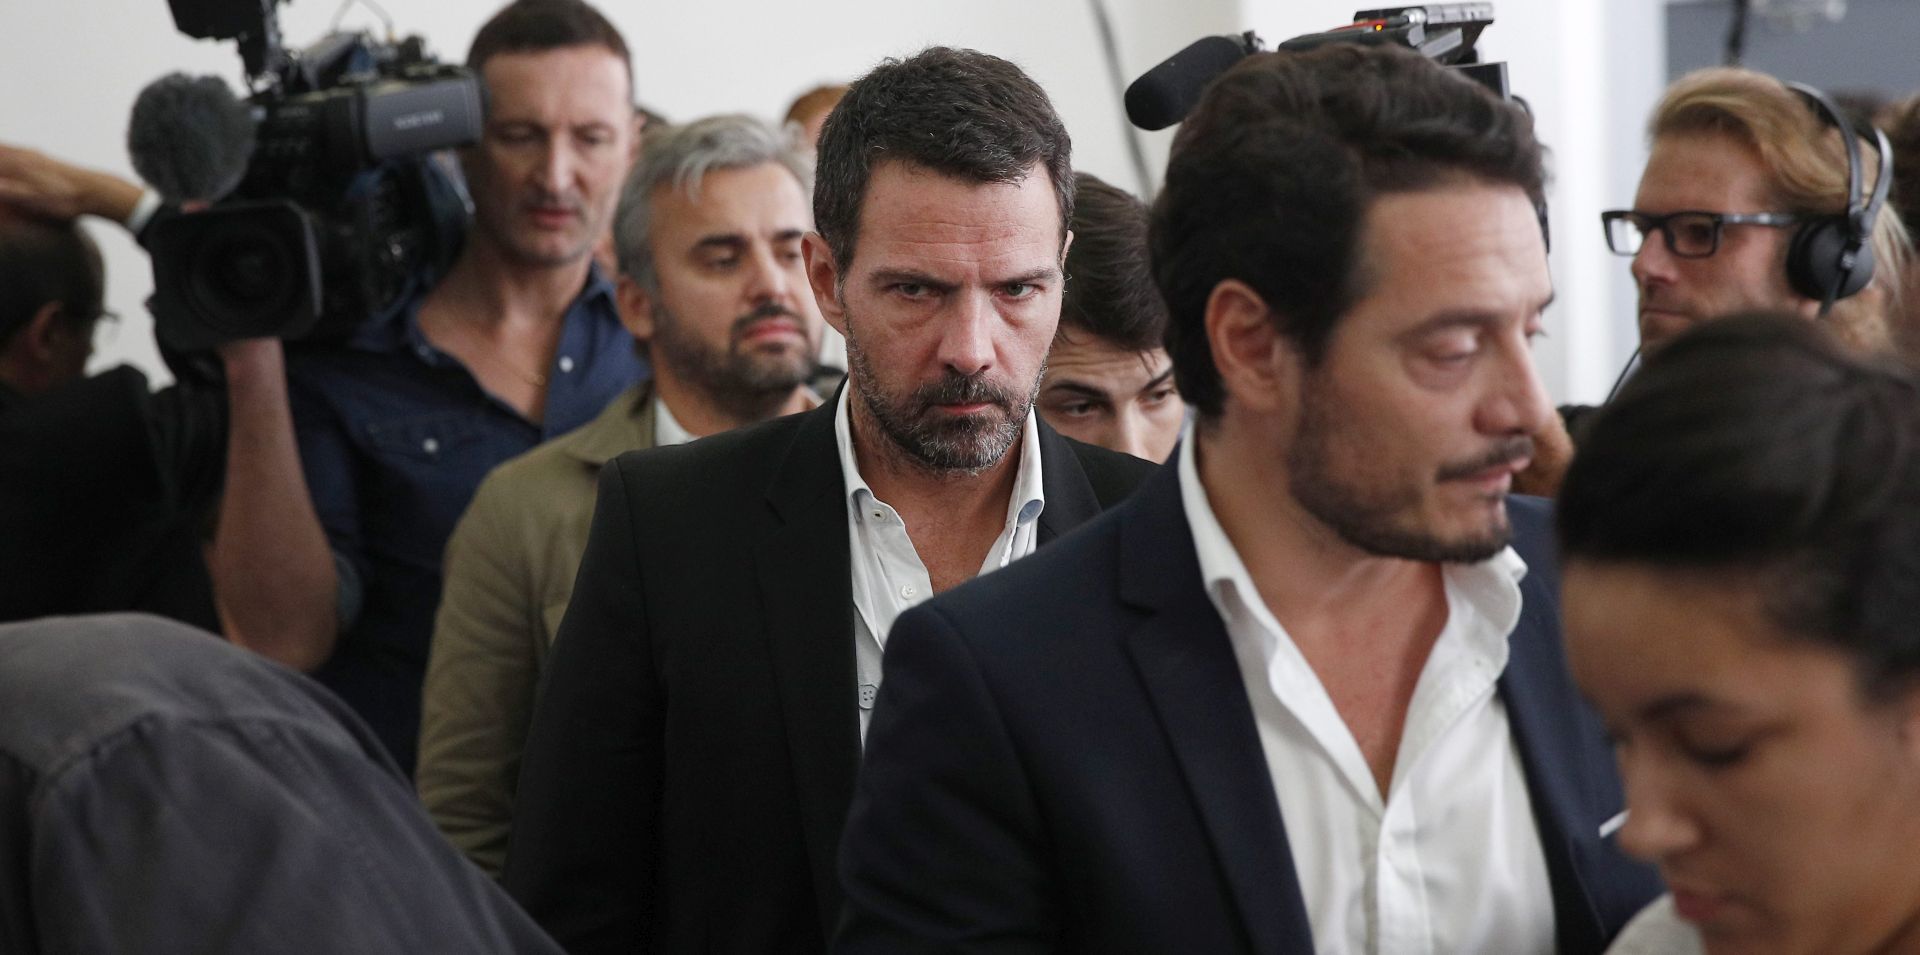 epa05553192 French former Societe Generale rogue trader Jerome Kerviel (C) arrives at the Versailles appeal court to fight a civil damages case in Versailles, France, 23 September 2016. Keviel has been sentenced to pay one milion euros to Societe Generale financial services group after they claimed a 4.9 billion euros of losses in 2008.  EPA/YOAN VALAT